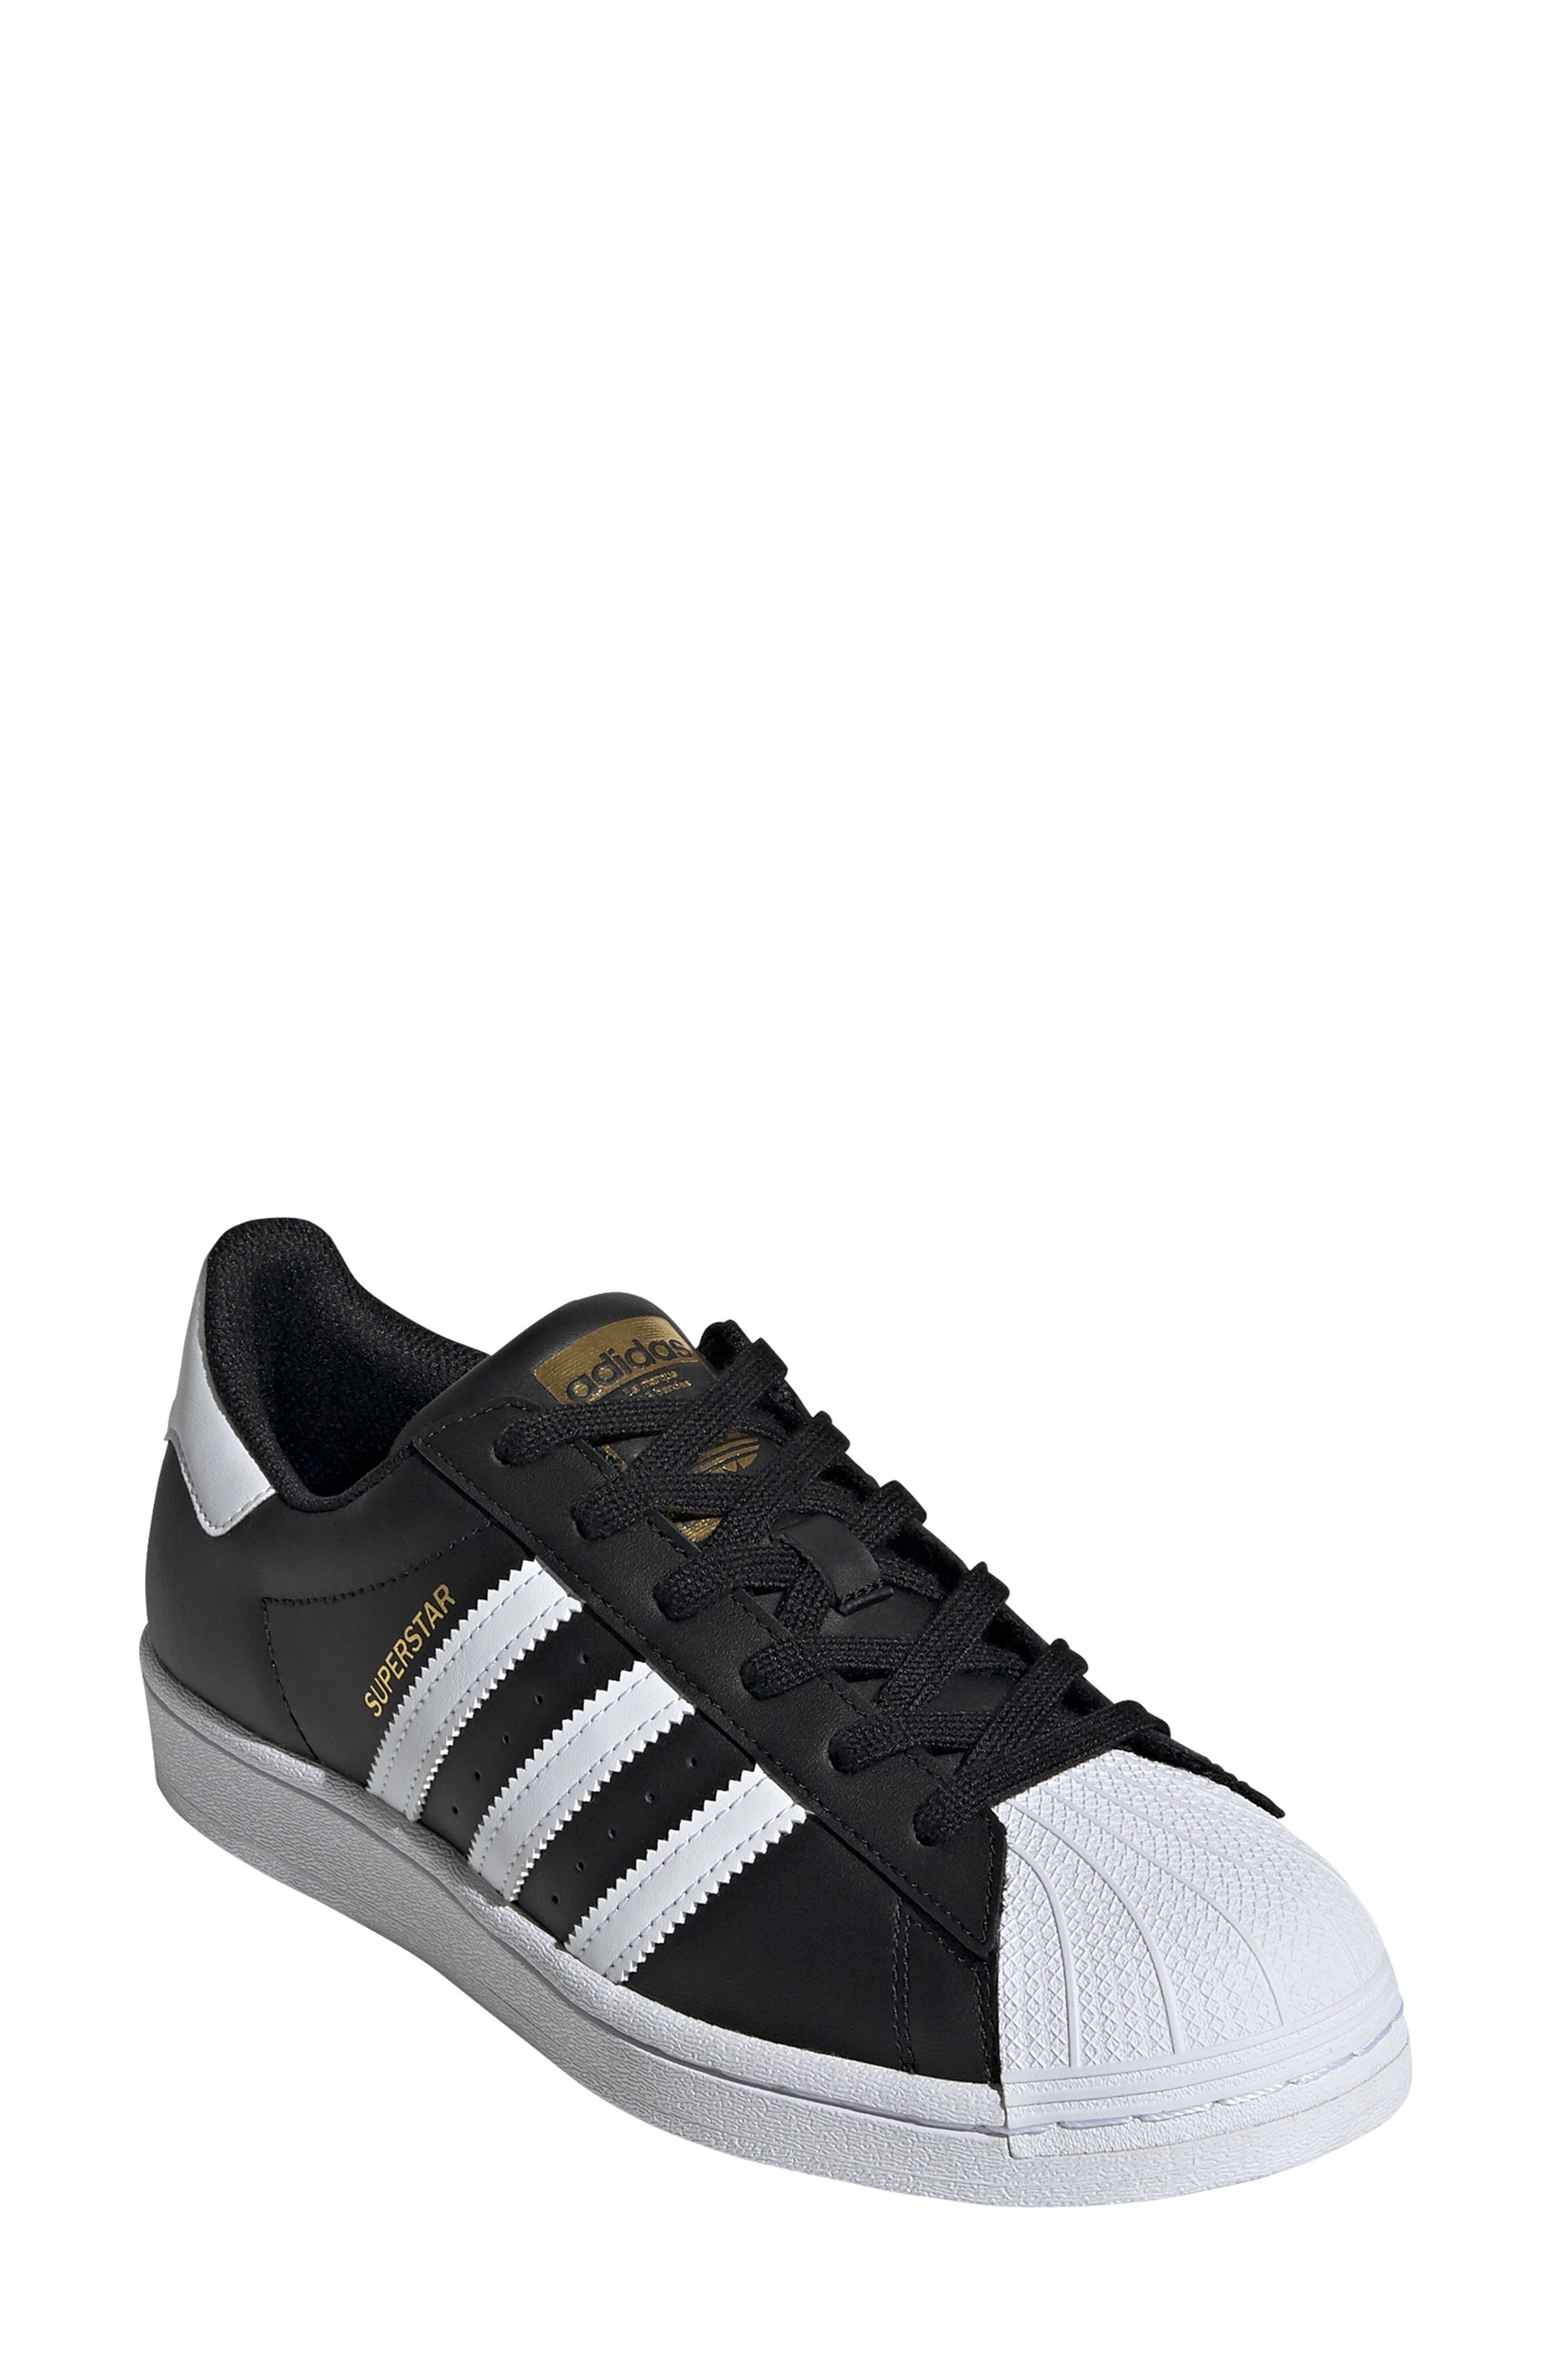 adidas clamshell shoes